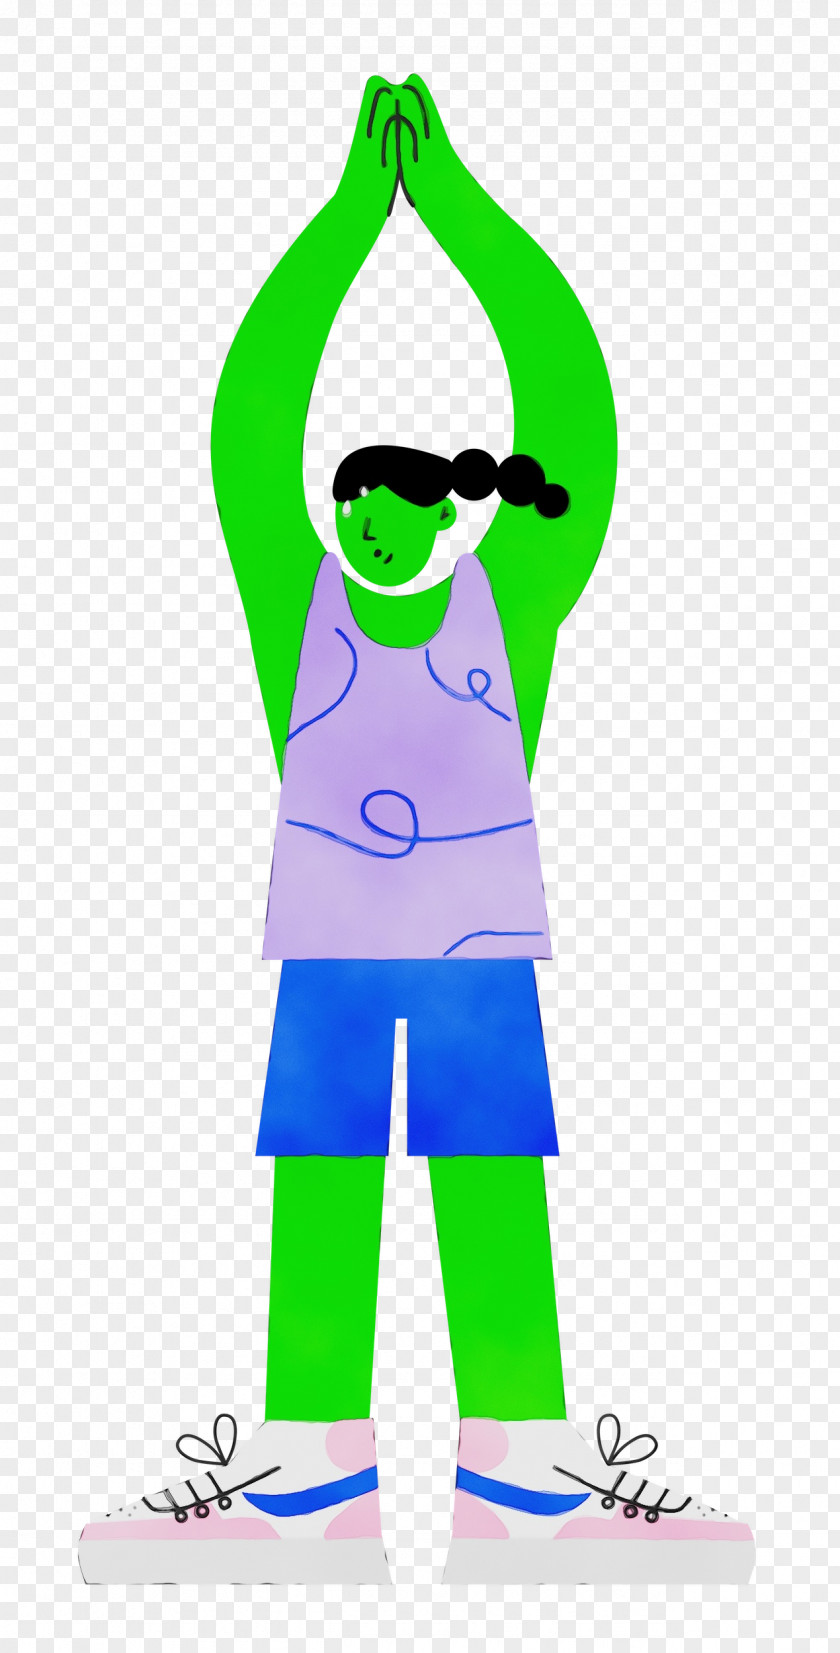 Sports Equipment Cartoon Character Outerwear / M Costume PNG